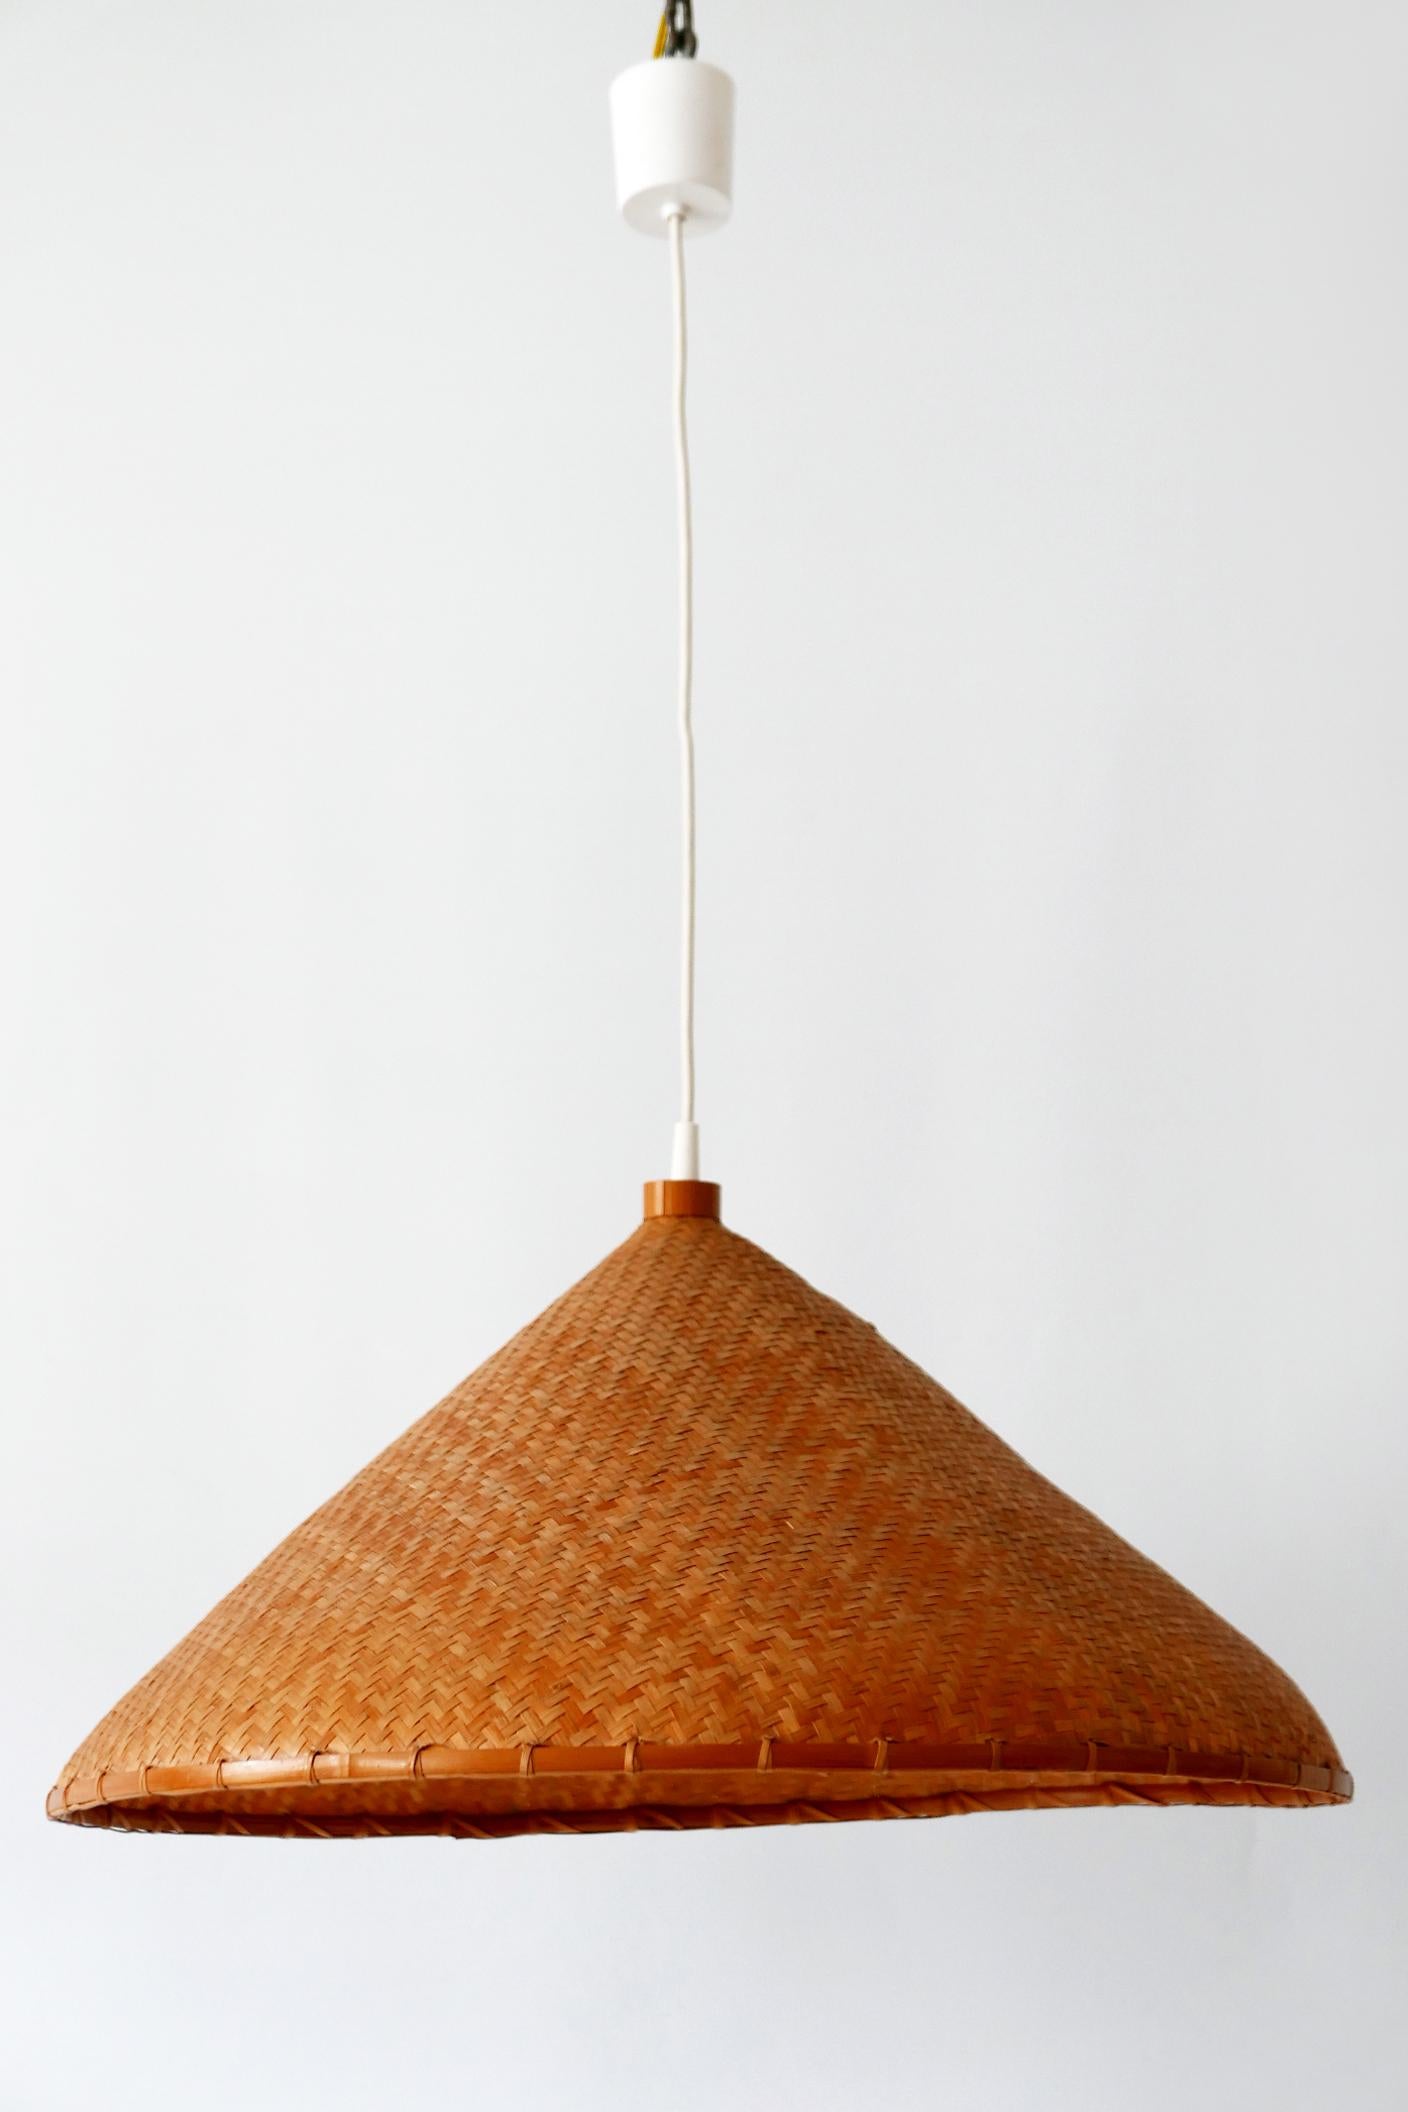 Large Mid-Century Modern Wicker Pendant Lamp or Hanging Light, Germany, 1960s For Sale 1